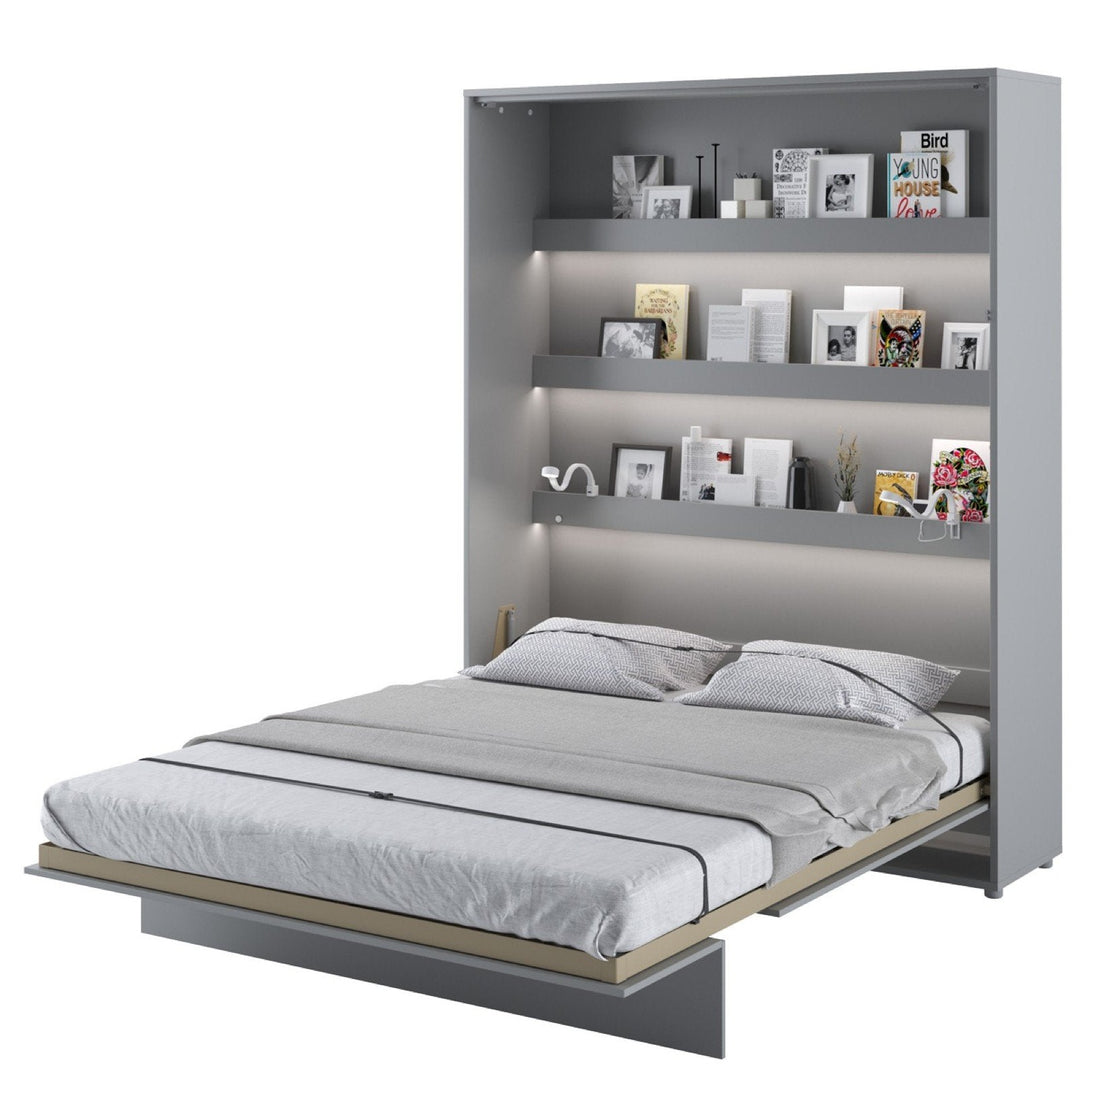 BC-12 Vertical Wall Bed Concept 160cm - £970.2 - Wall Bed 